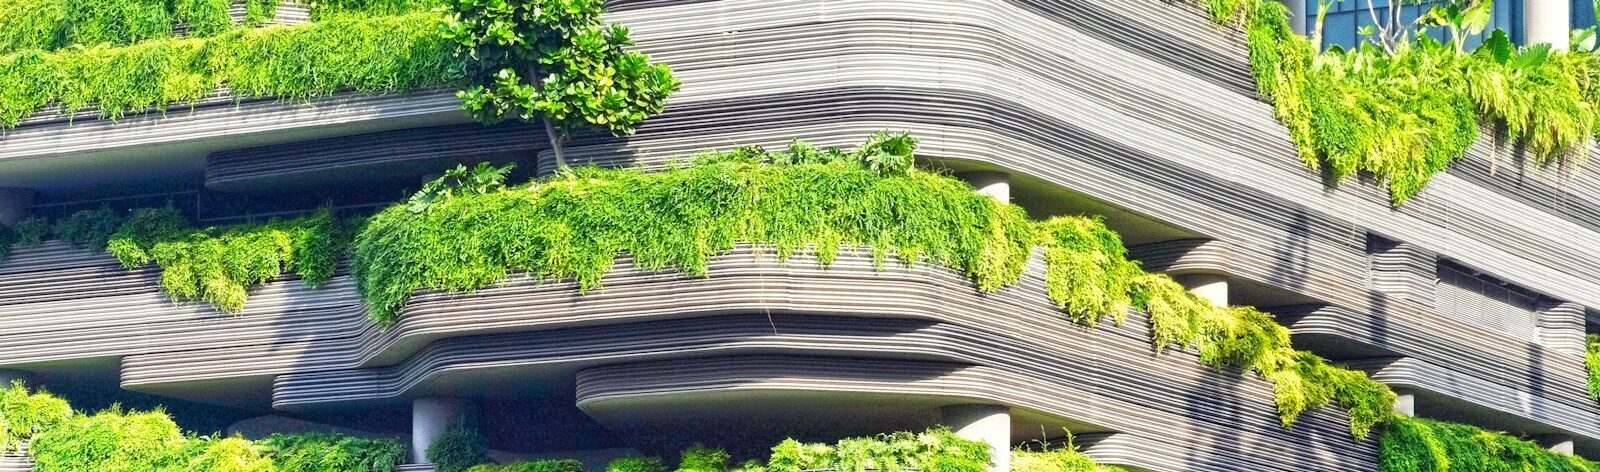 gray concrete building covered trees